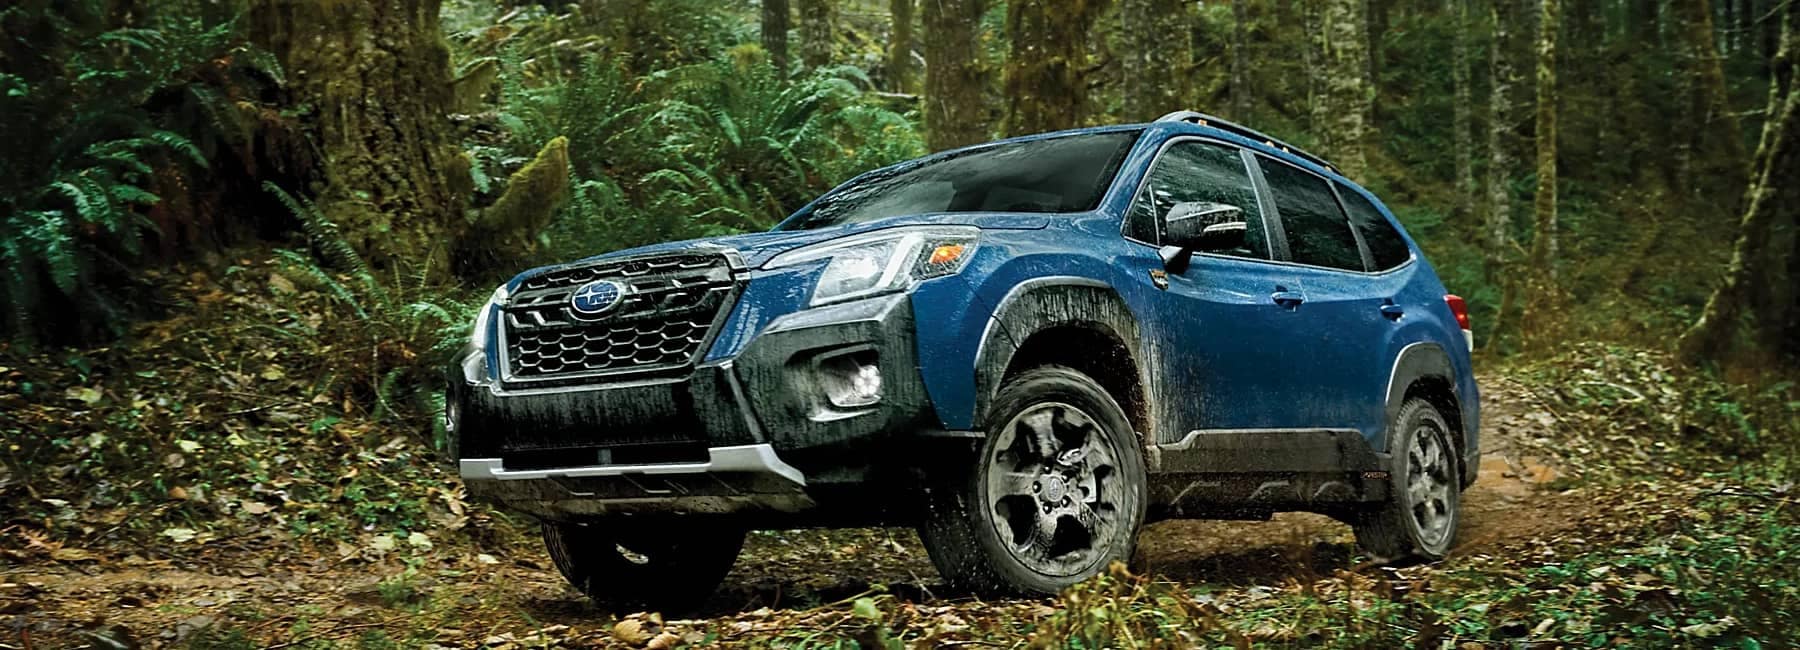 Forester-low angle hero-parked in forest-navy blue